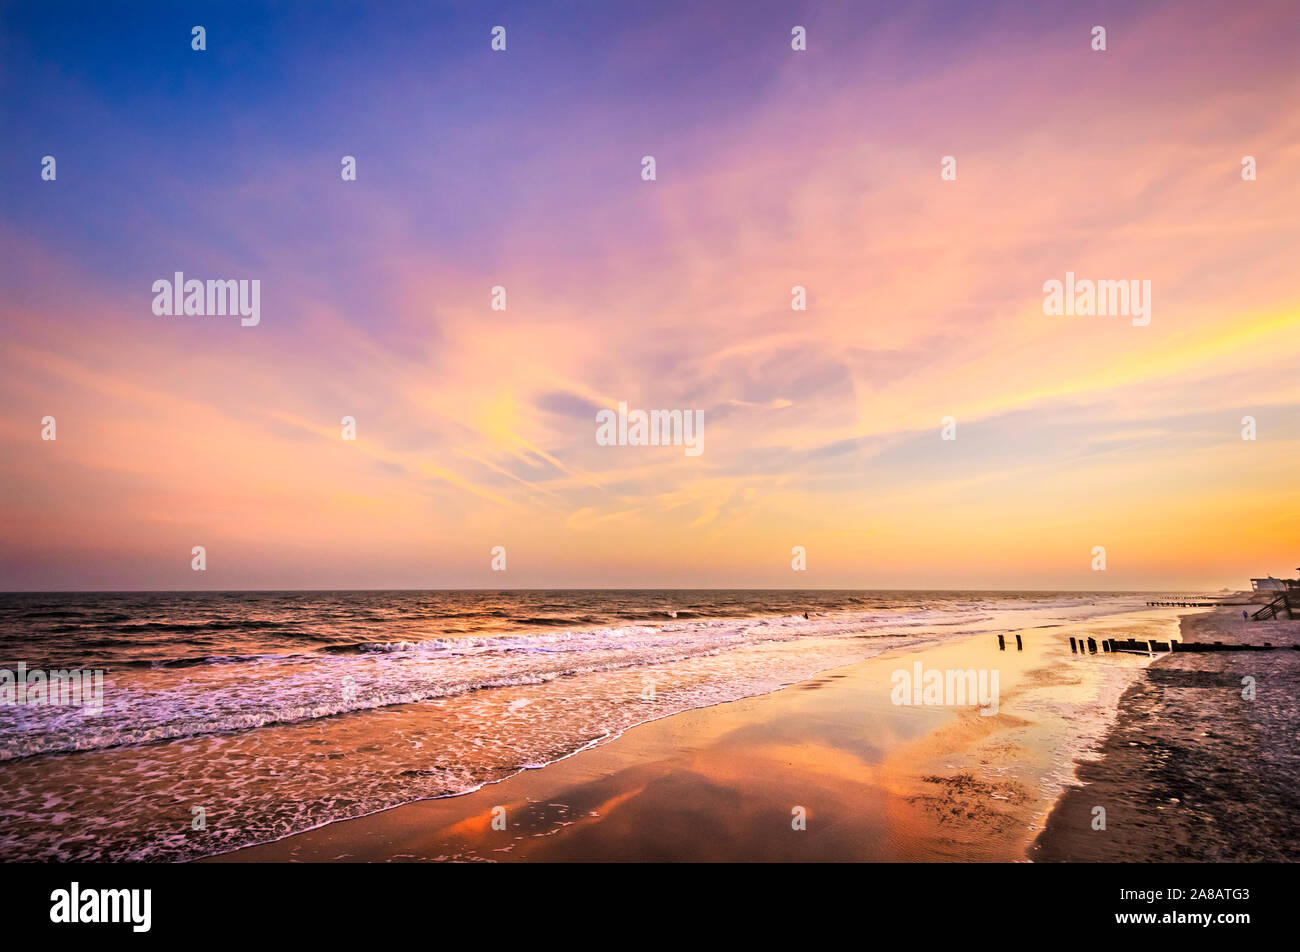 The sun sets at the Washout on Folly Beach, April 3, 2015, in Folly Beach, South Carolina. The beach is known for its prime surfing spots. Stock Photo